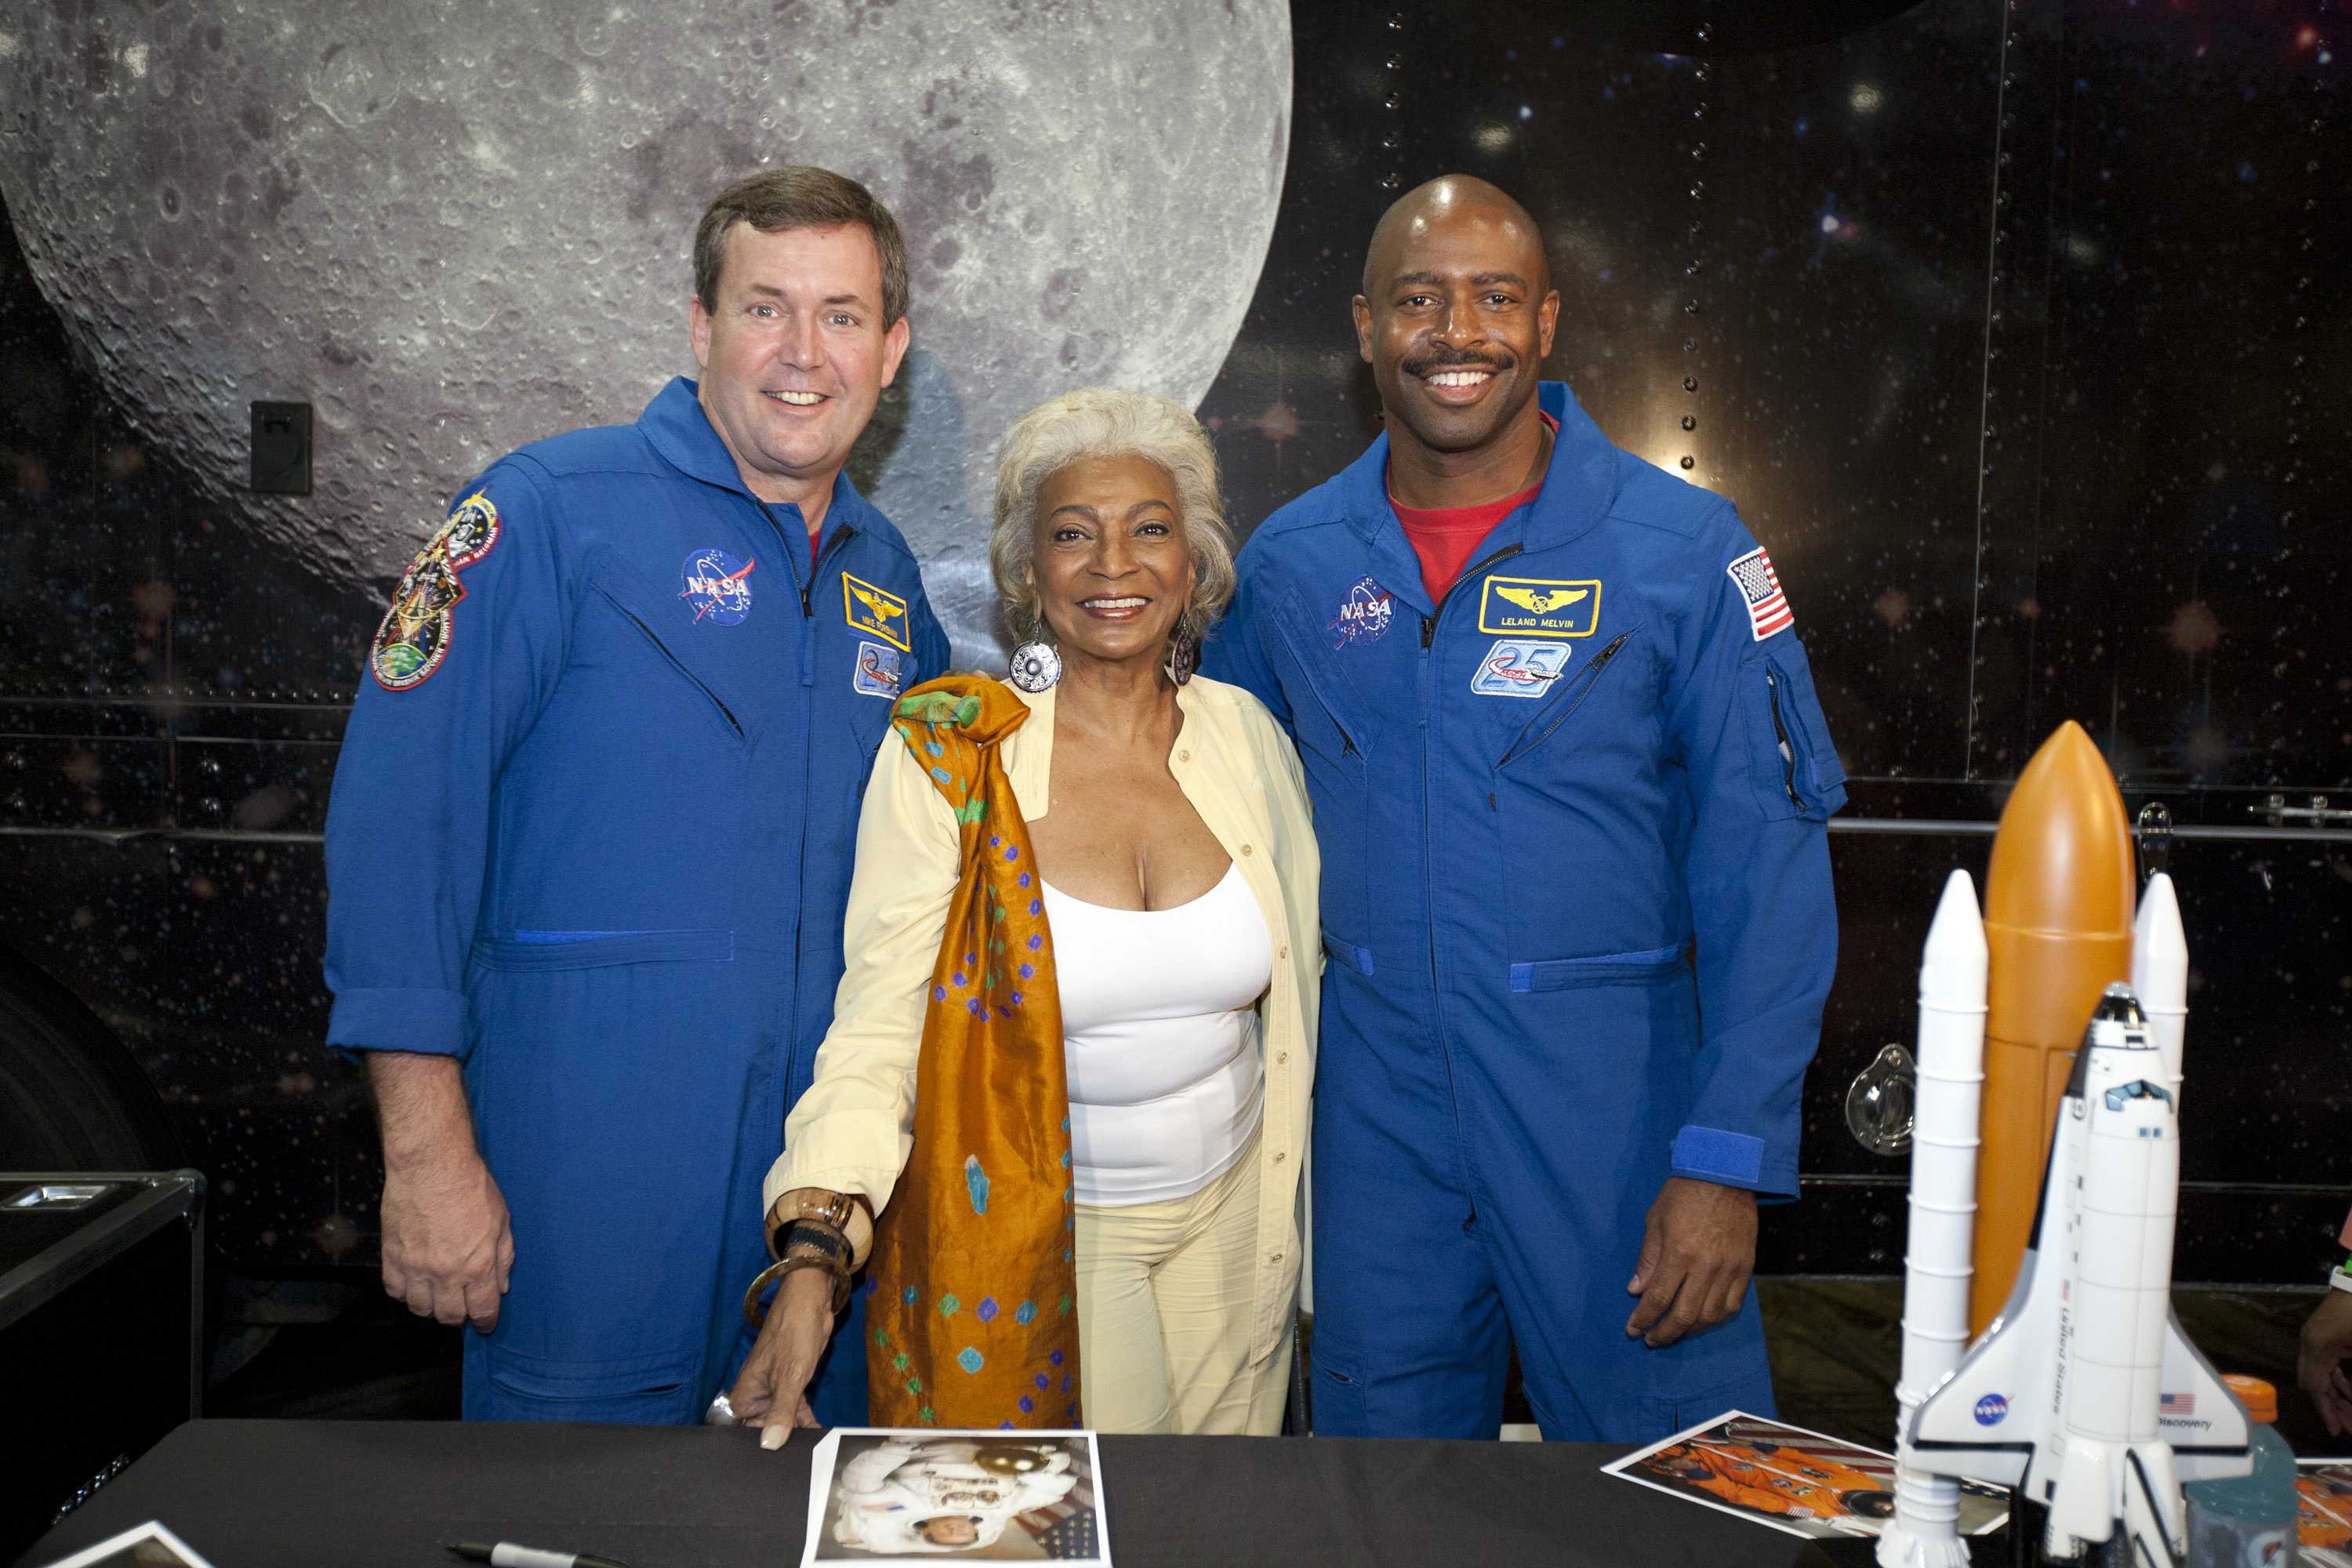 Nichelle Nichols smiling and posing for a photo in between two astronauts in front of picture of the moon.